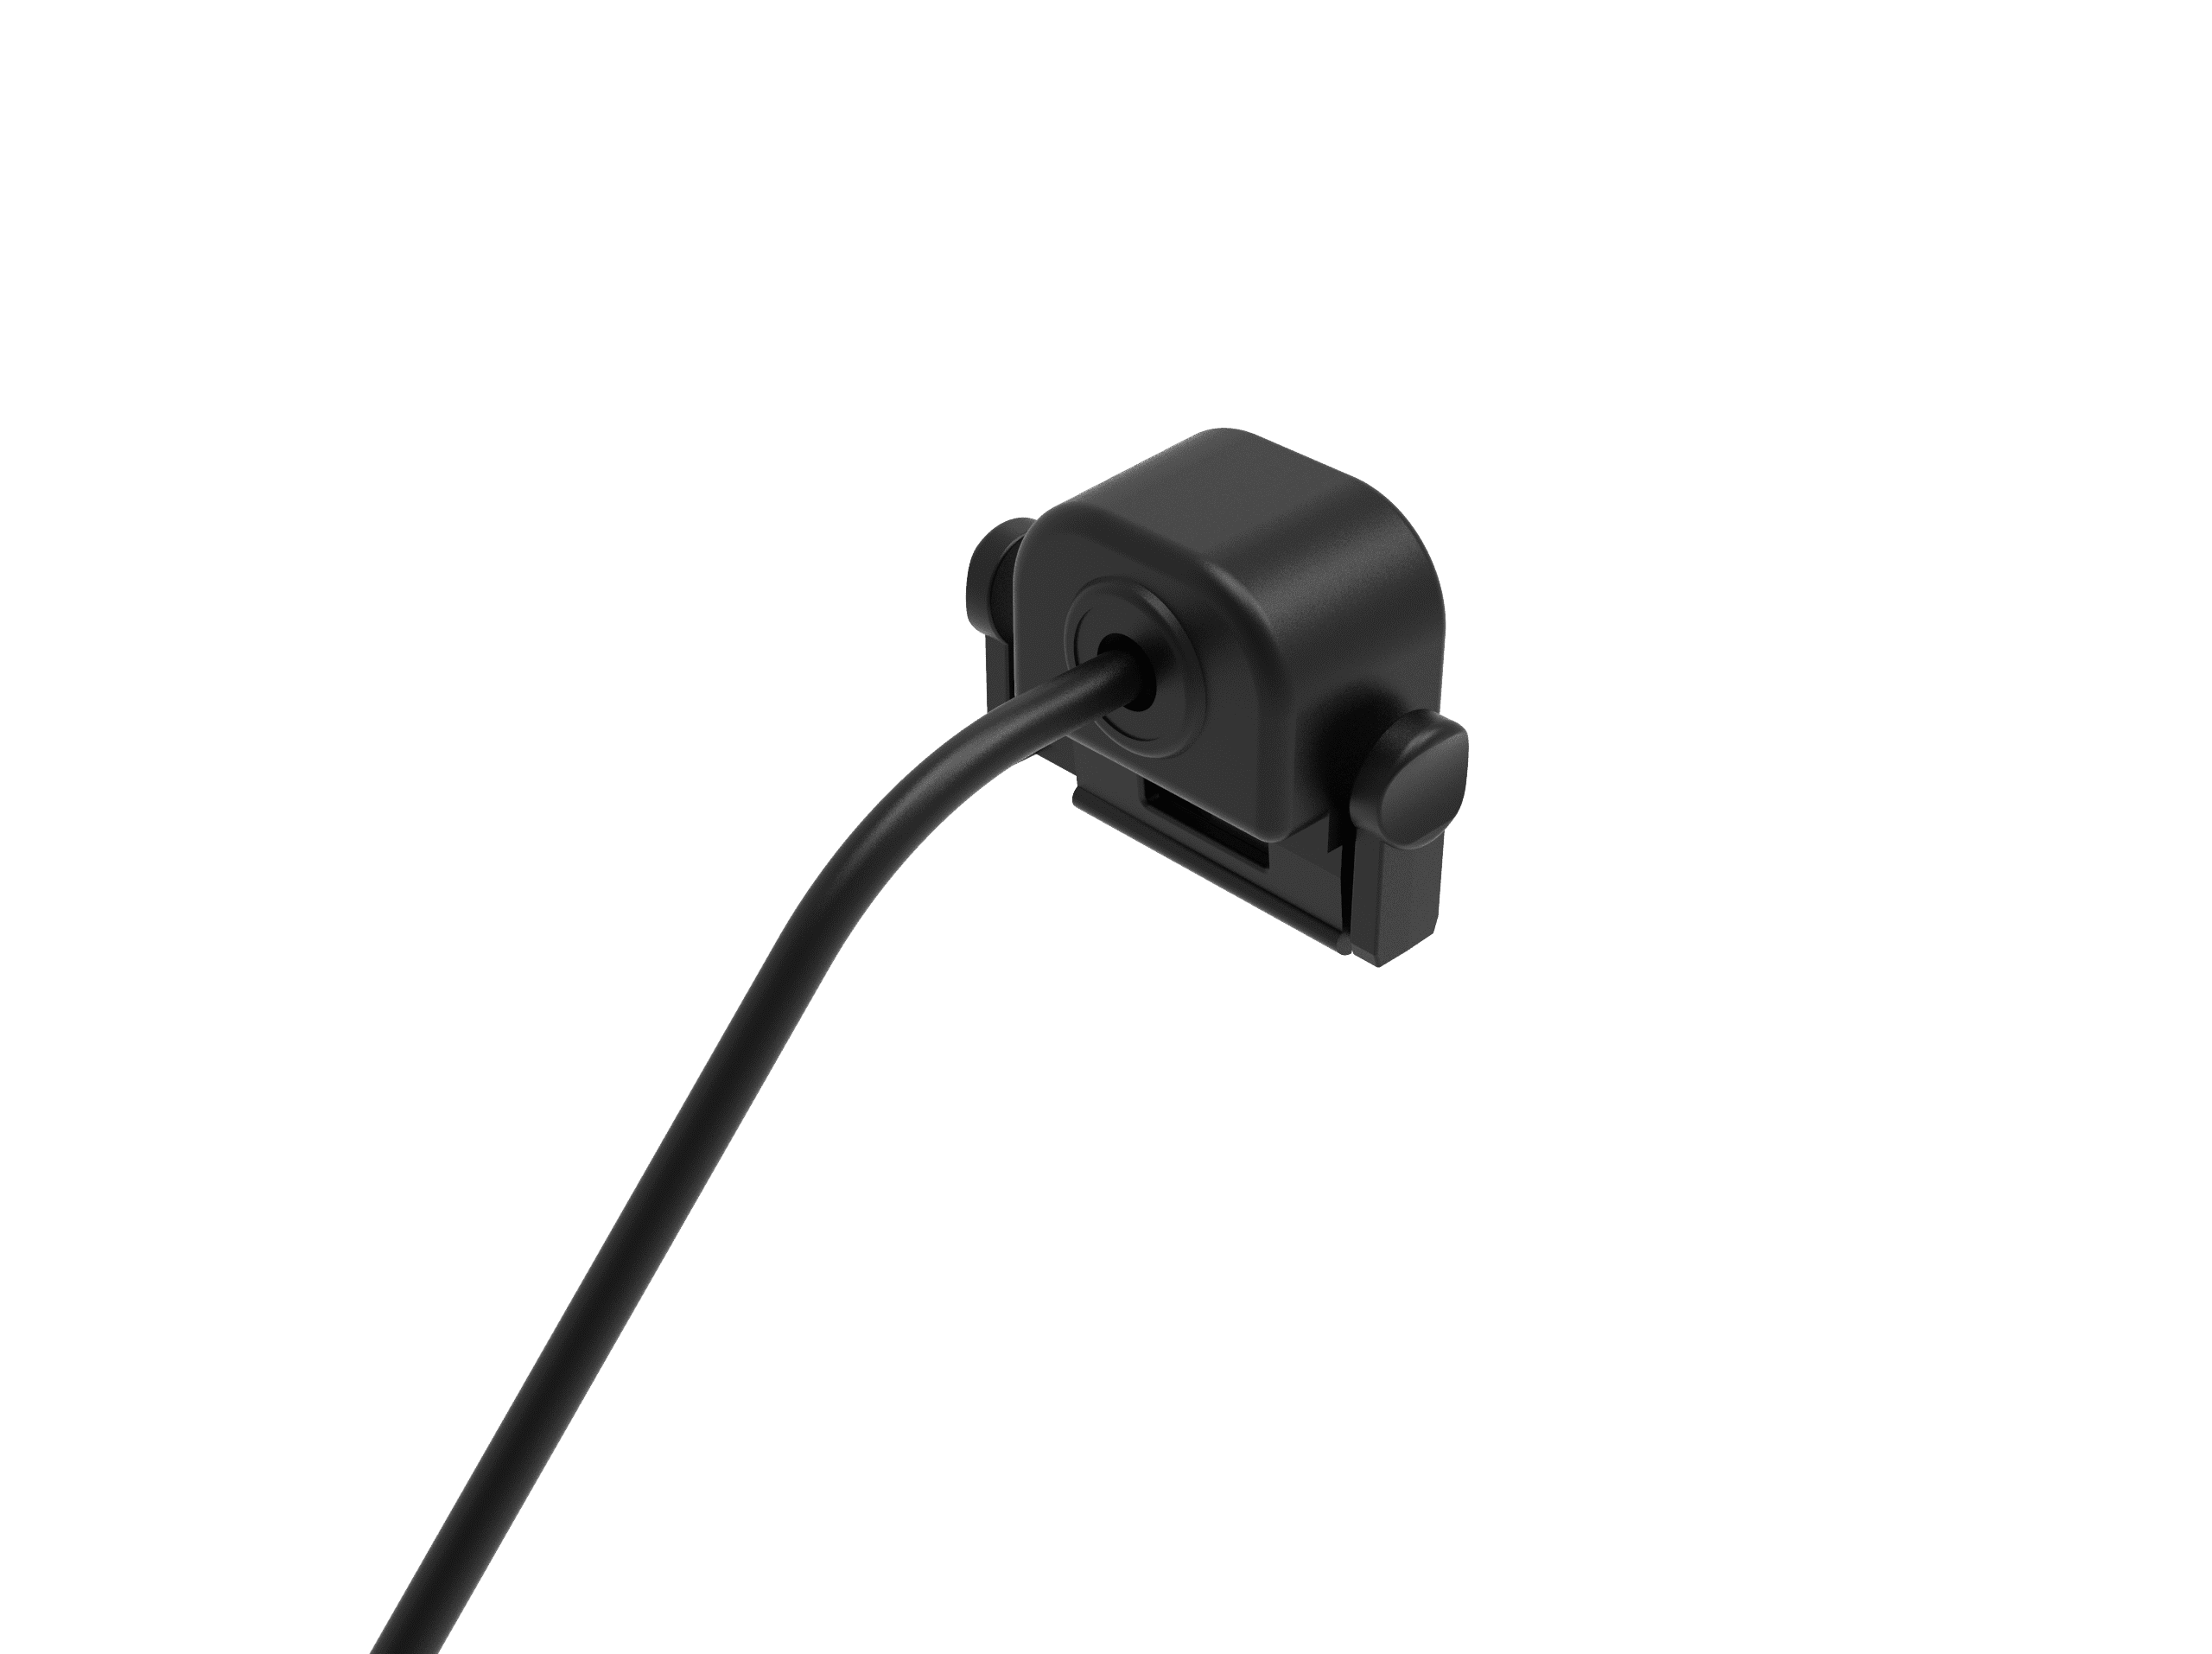 pick-up connector